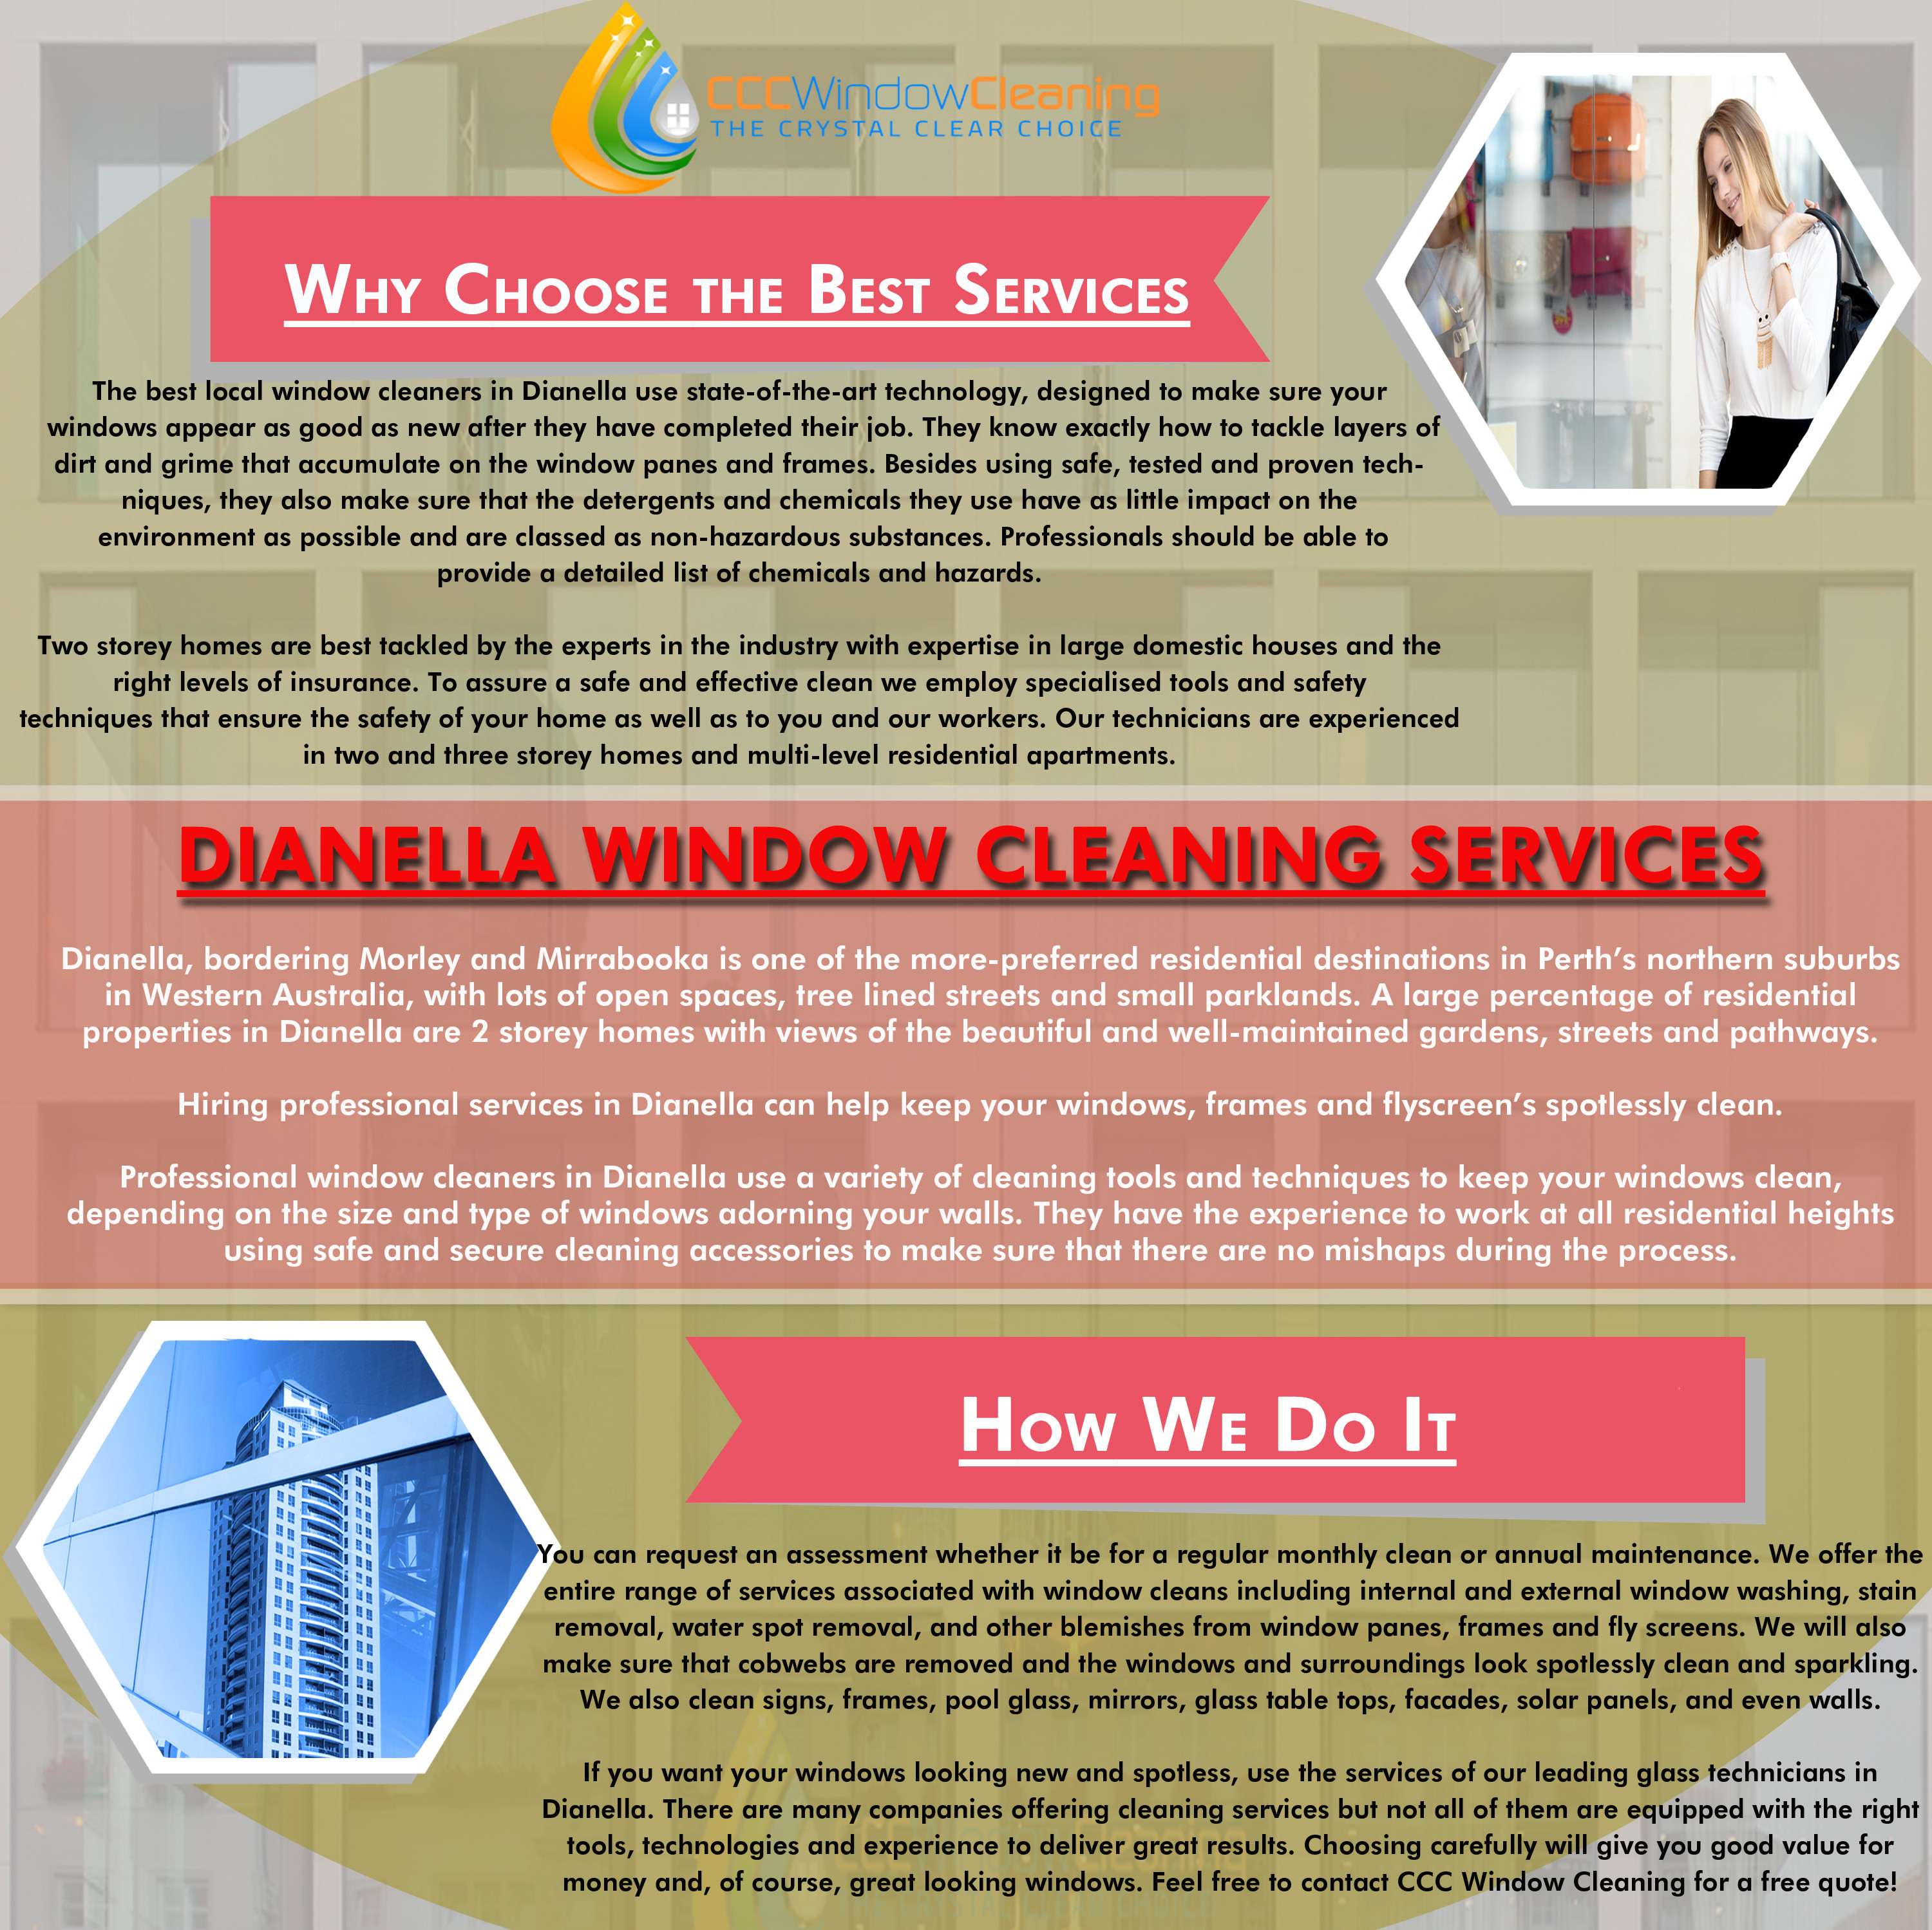 Dianella Window Cleaning Services